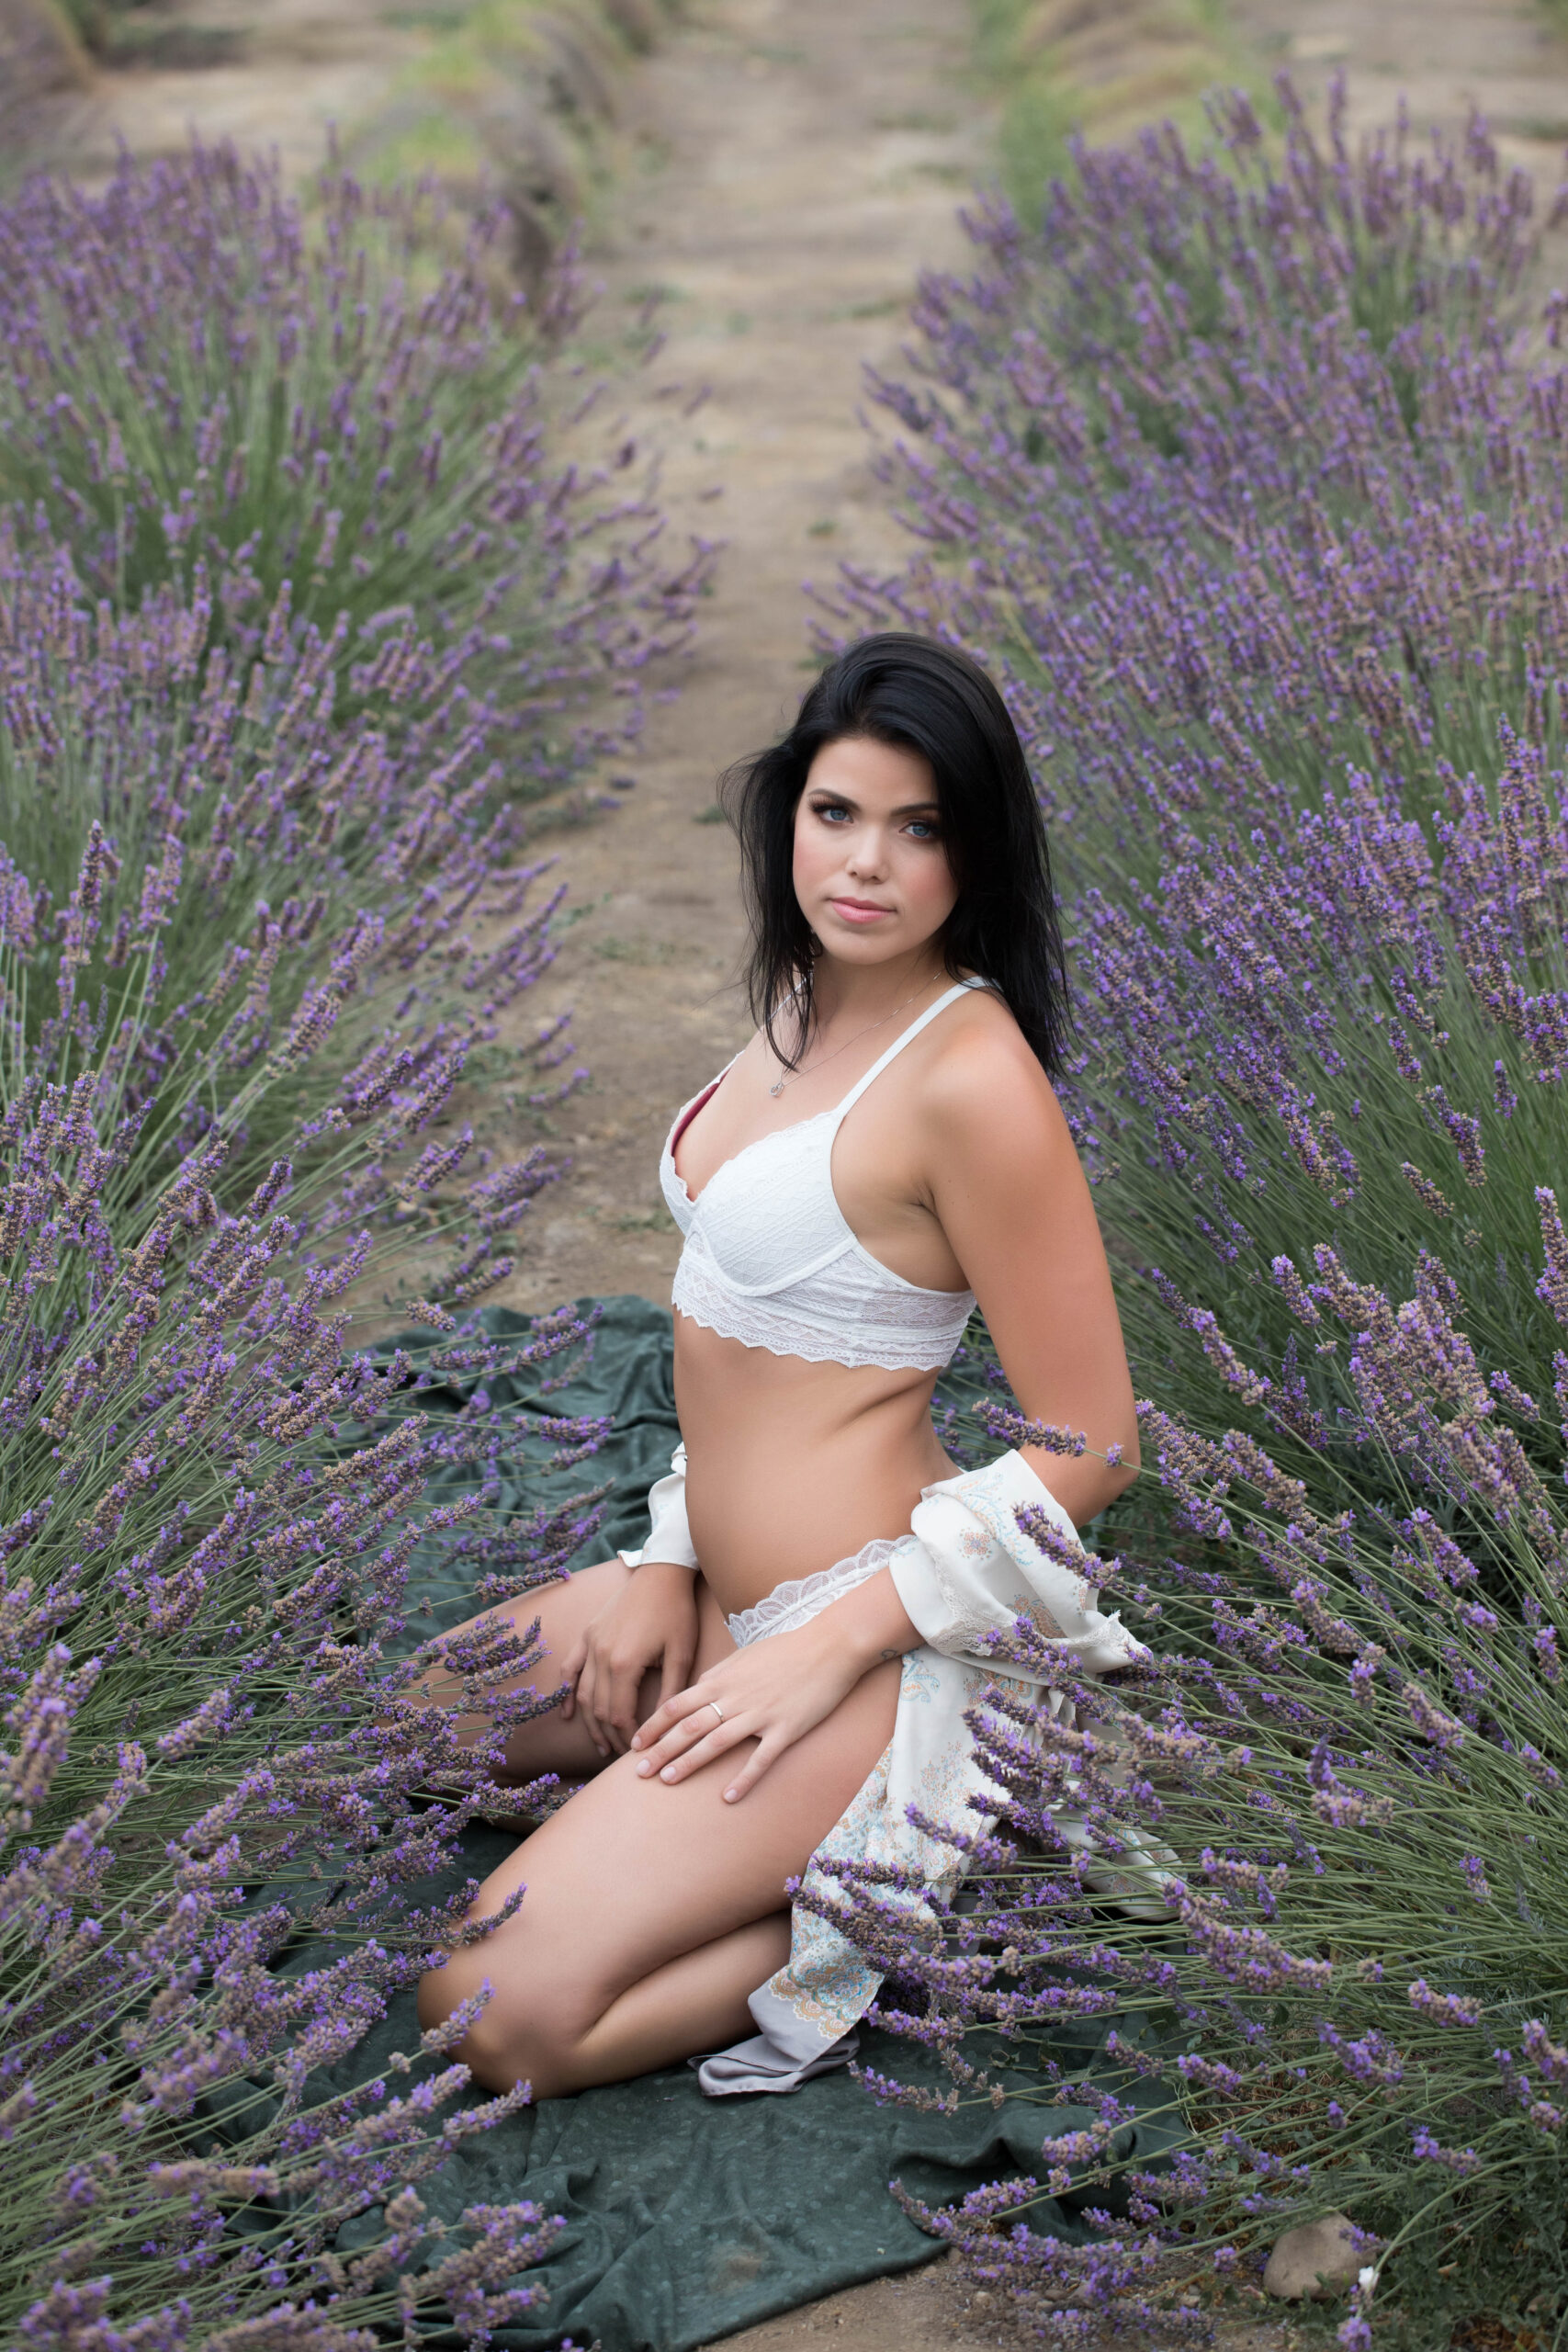 woman sitting in lavender field in intimate clothing